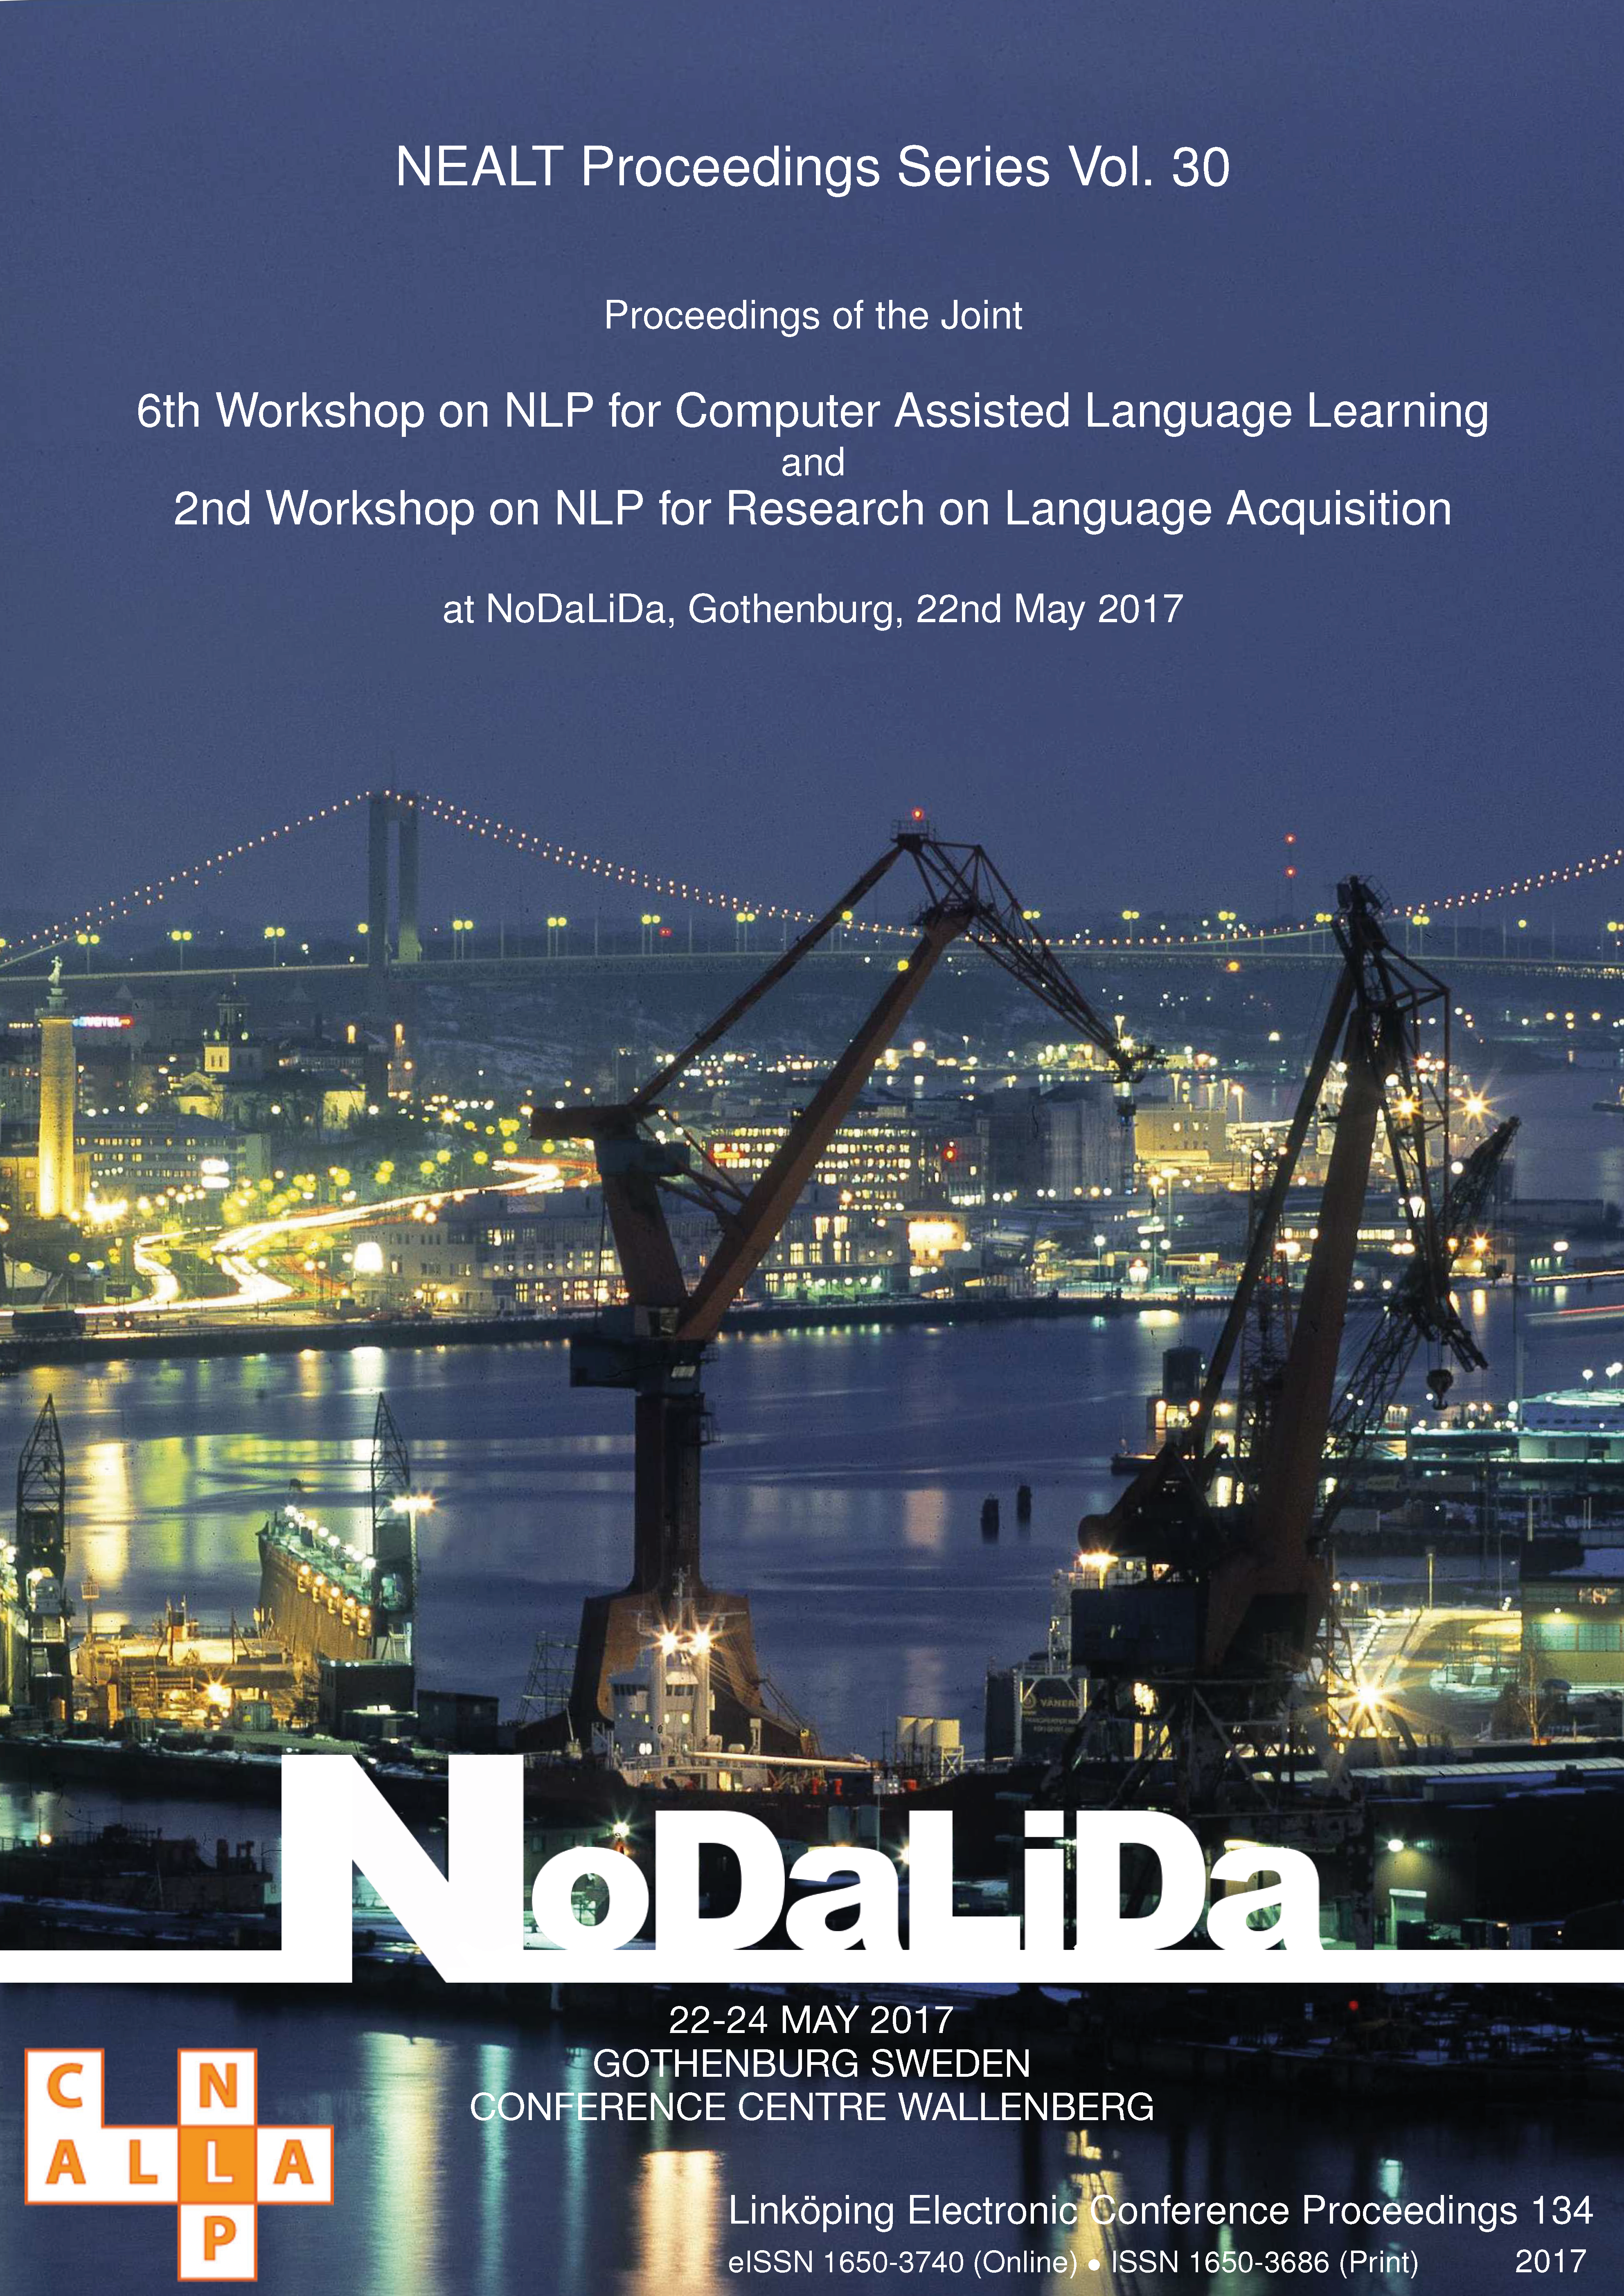 					View Proceedings of the Joint 6th Workshop on NLP for Computer Assisted Language Learning and 2nd Workshop on NLP for Research on Language Acquisition at NoDaLiDa, Gothenburg, 22nd May 2017
				